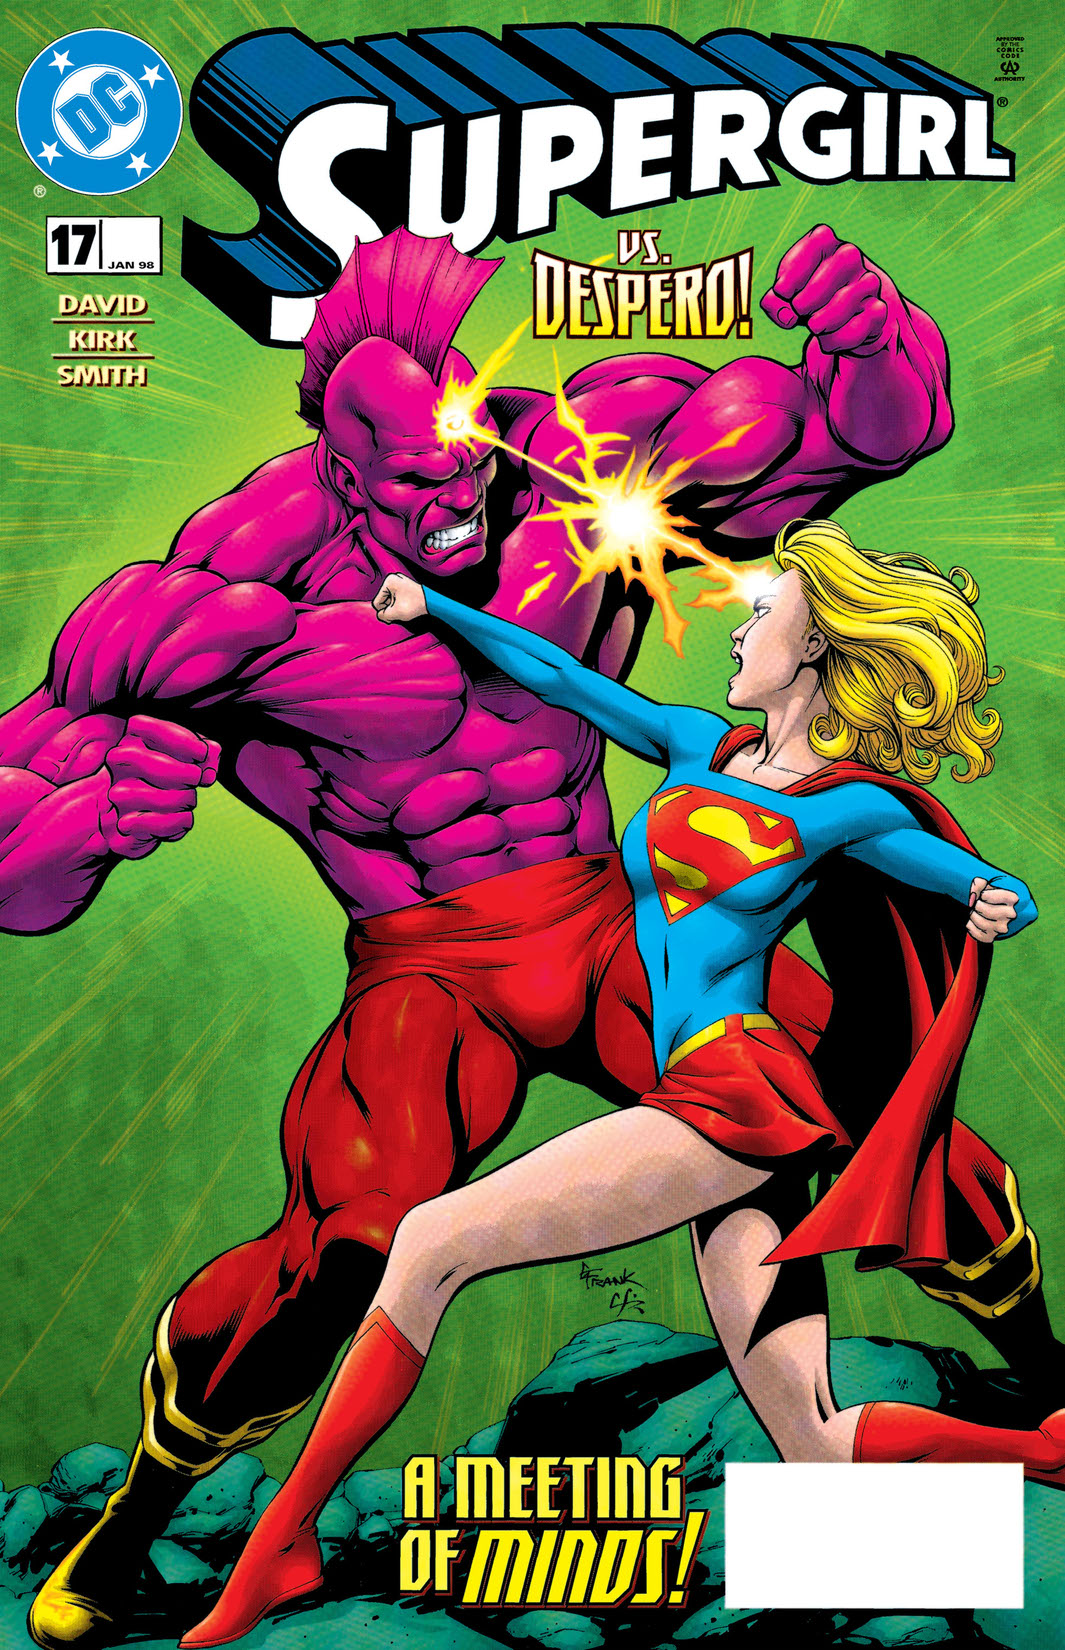 Supergirl (1996-) #17 preview images